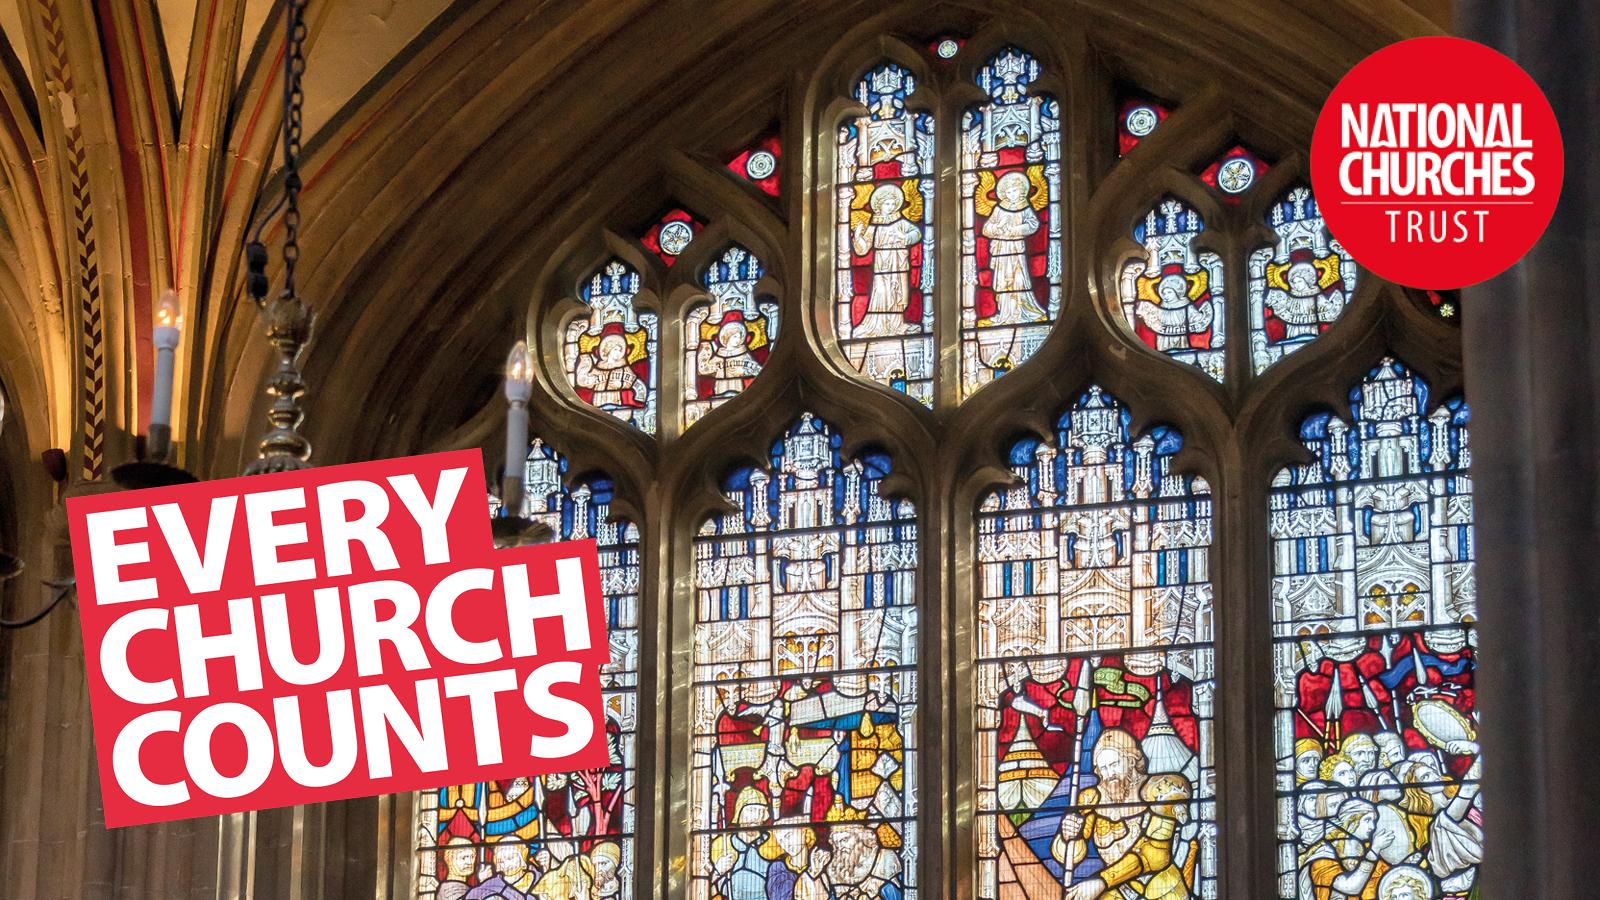 A stained glass window with 'Every Church Counts' and the National Churches Trust logo on top